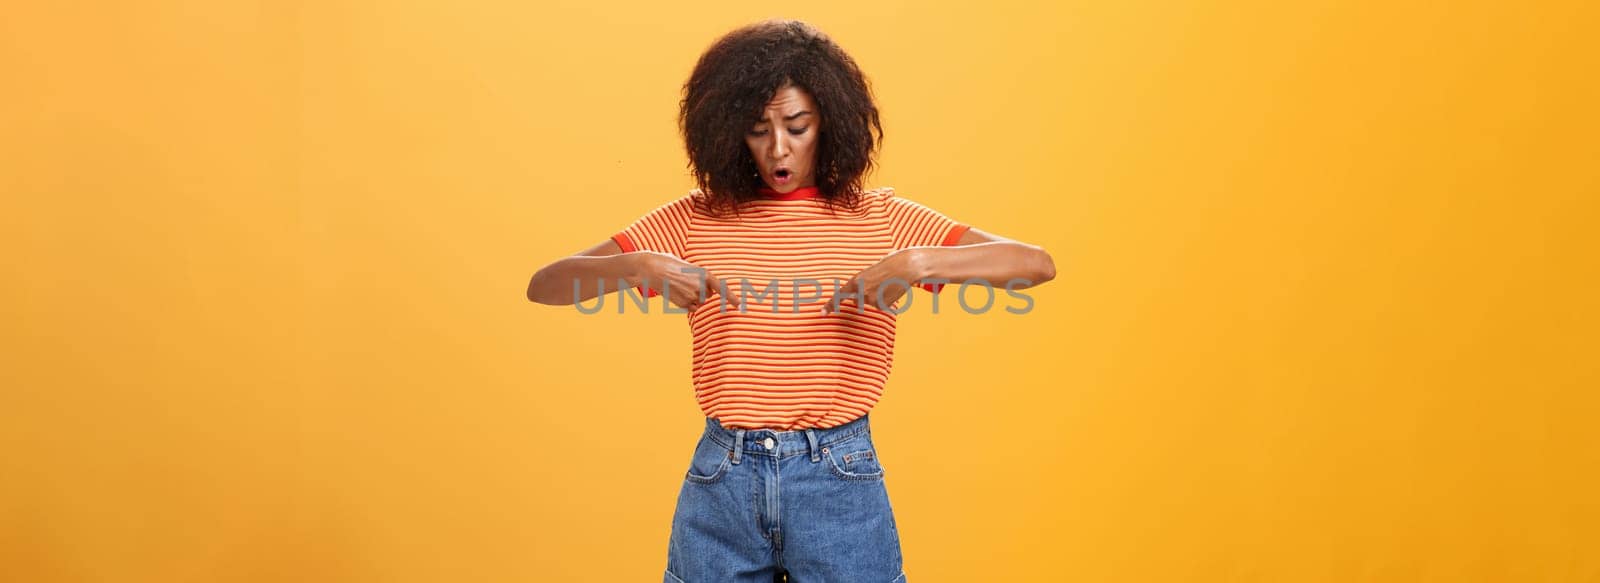 Portrait of worried questioned and surprised african american female with curly hairstyle looking and pointing at stomach or belly feeling discomfort and problems with health over orange background. Lifestyle.